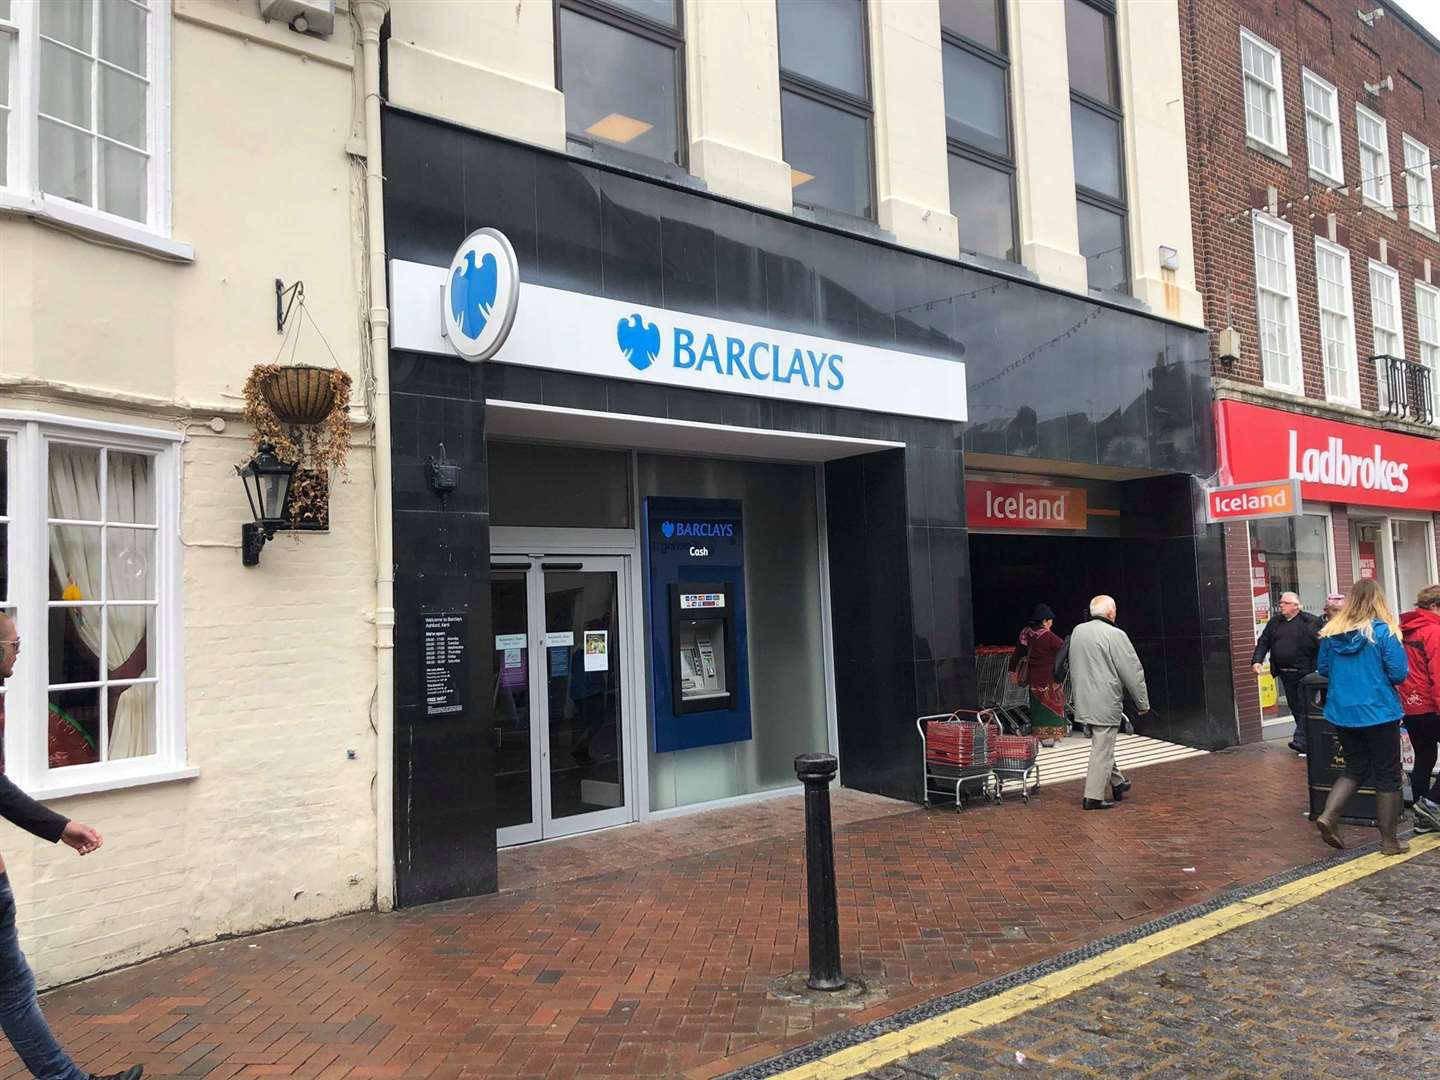 Barclays has come in for fierce criticism for the decision to stop cash withdrawals at post offices